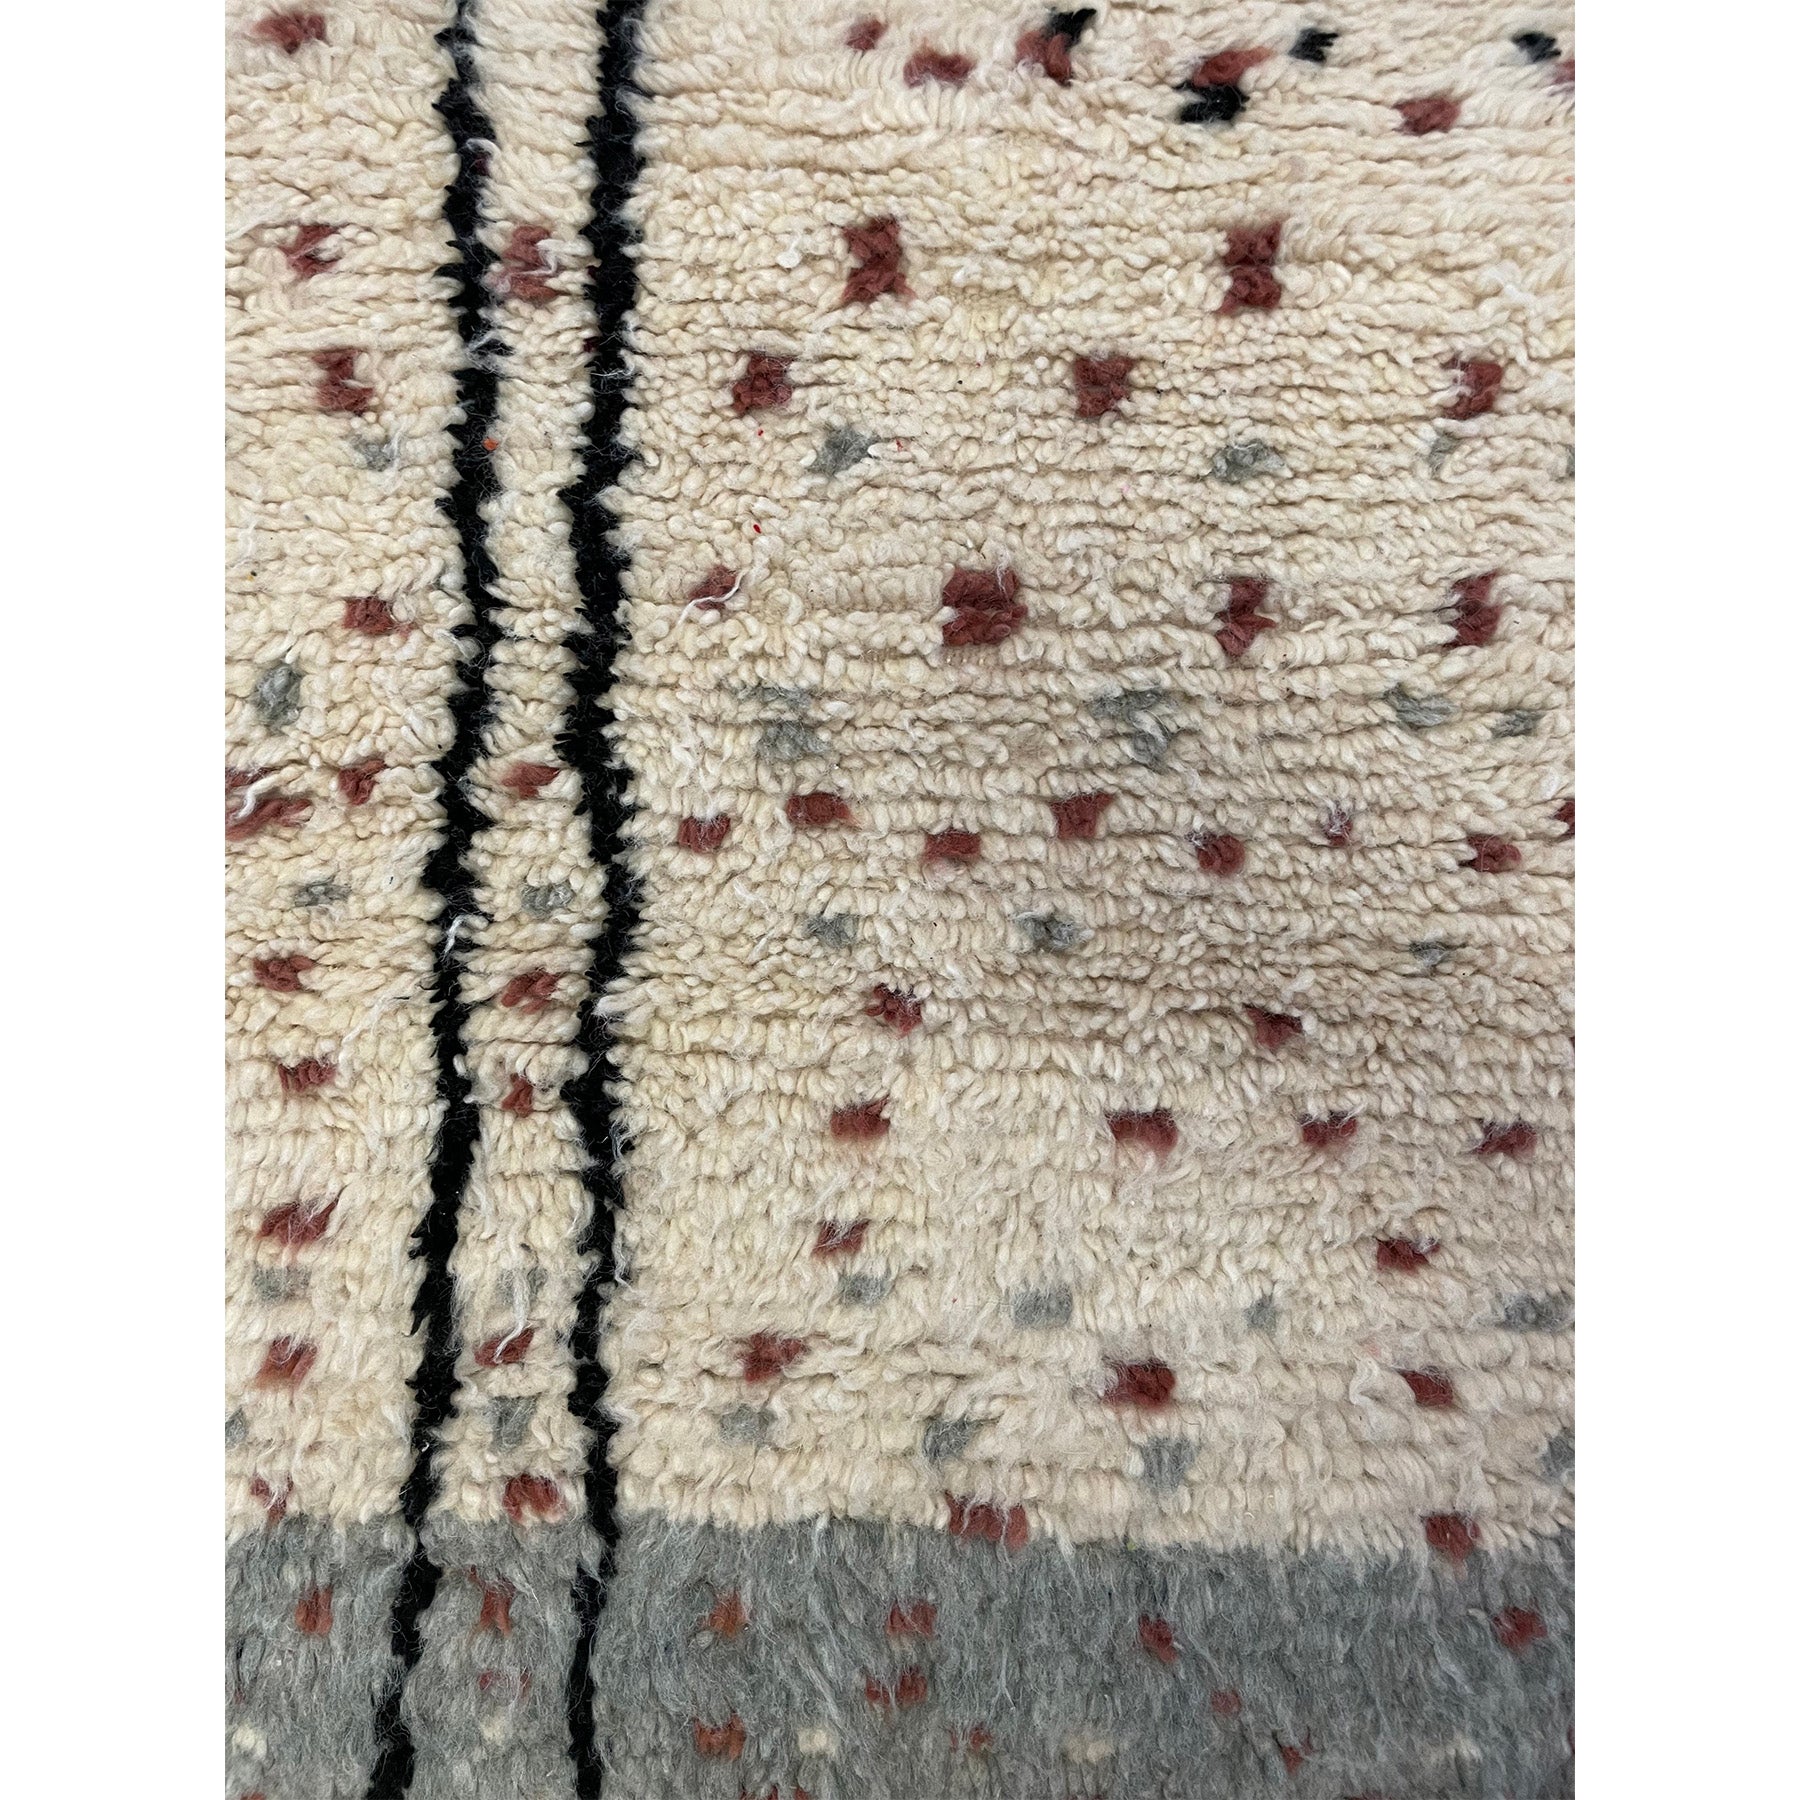 Speckled off-white handknotted Moroccan runner rug - Kantara | Moroccan Rugs